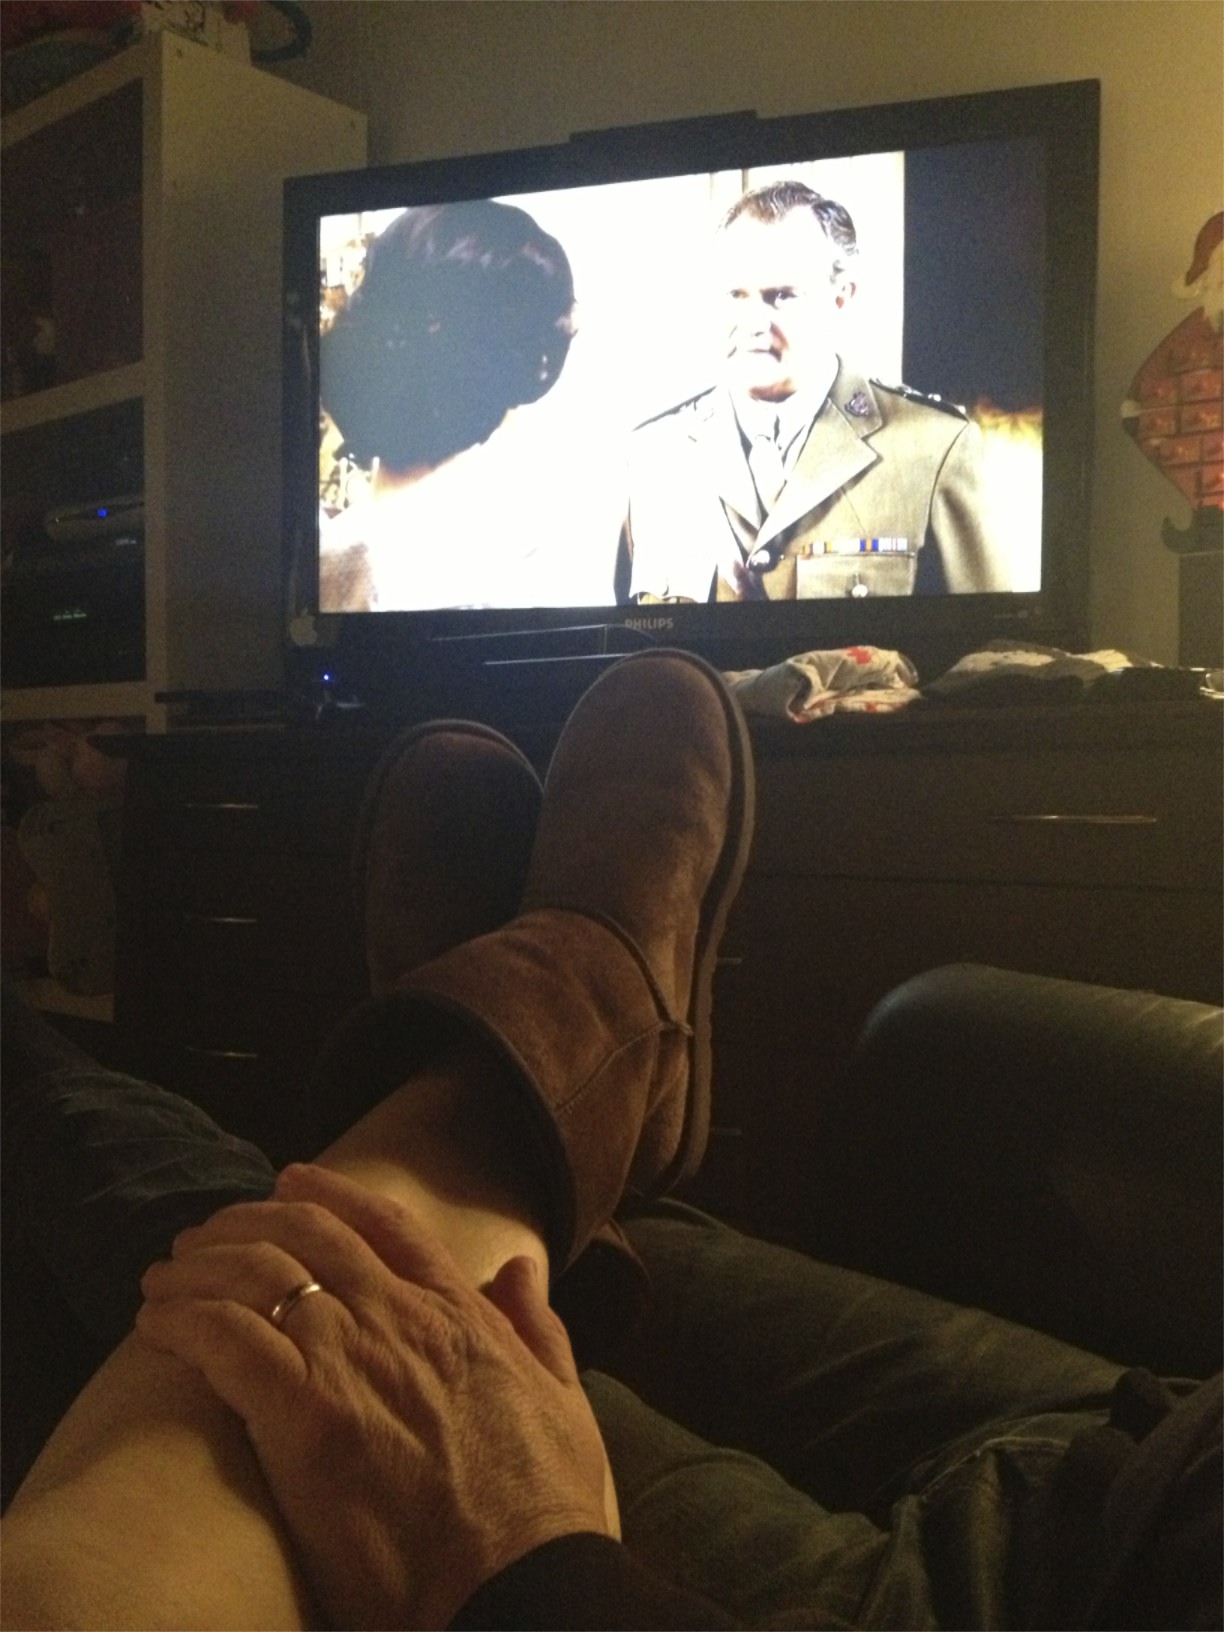 On NYE we partied like it was 1999 watching  Downton Abbey in our uggs and going to bed at 12.01am